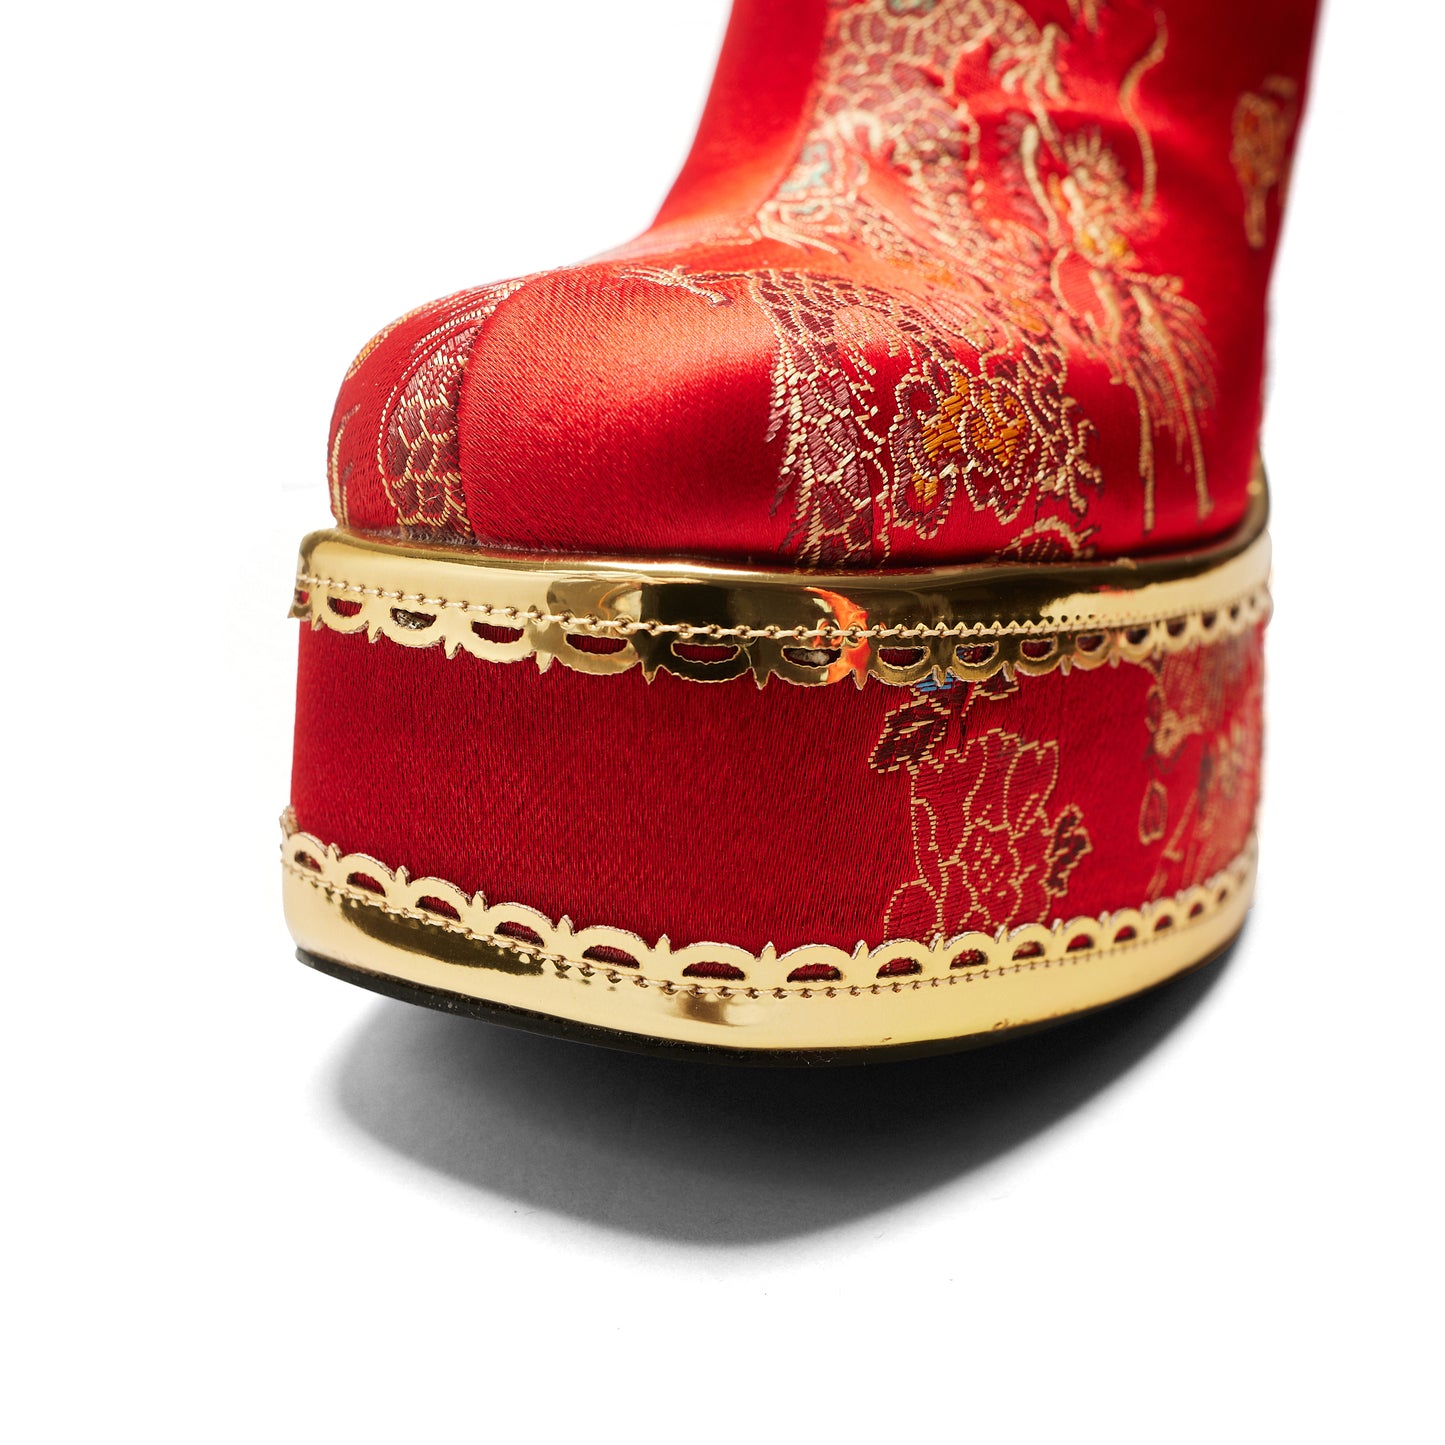 The Ornate Soul Playboy Red Heeled Boots - Ankle Boots - KOI Footwear - Red - Platform Detail